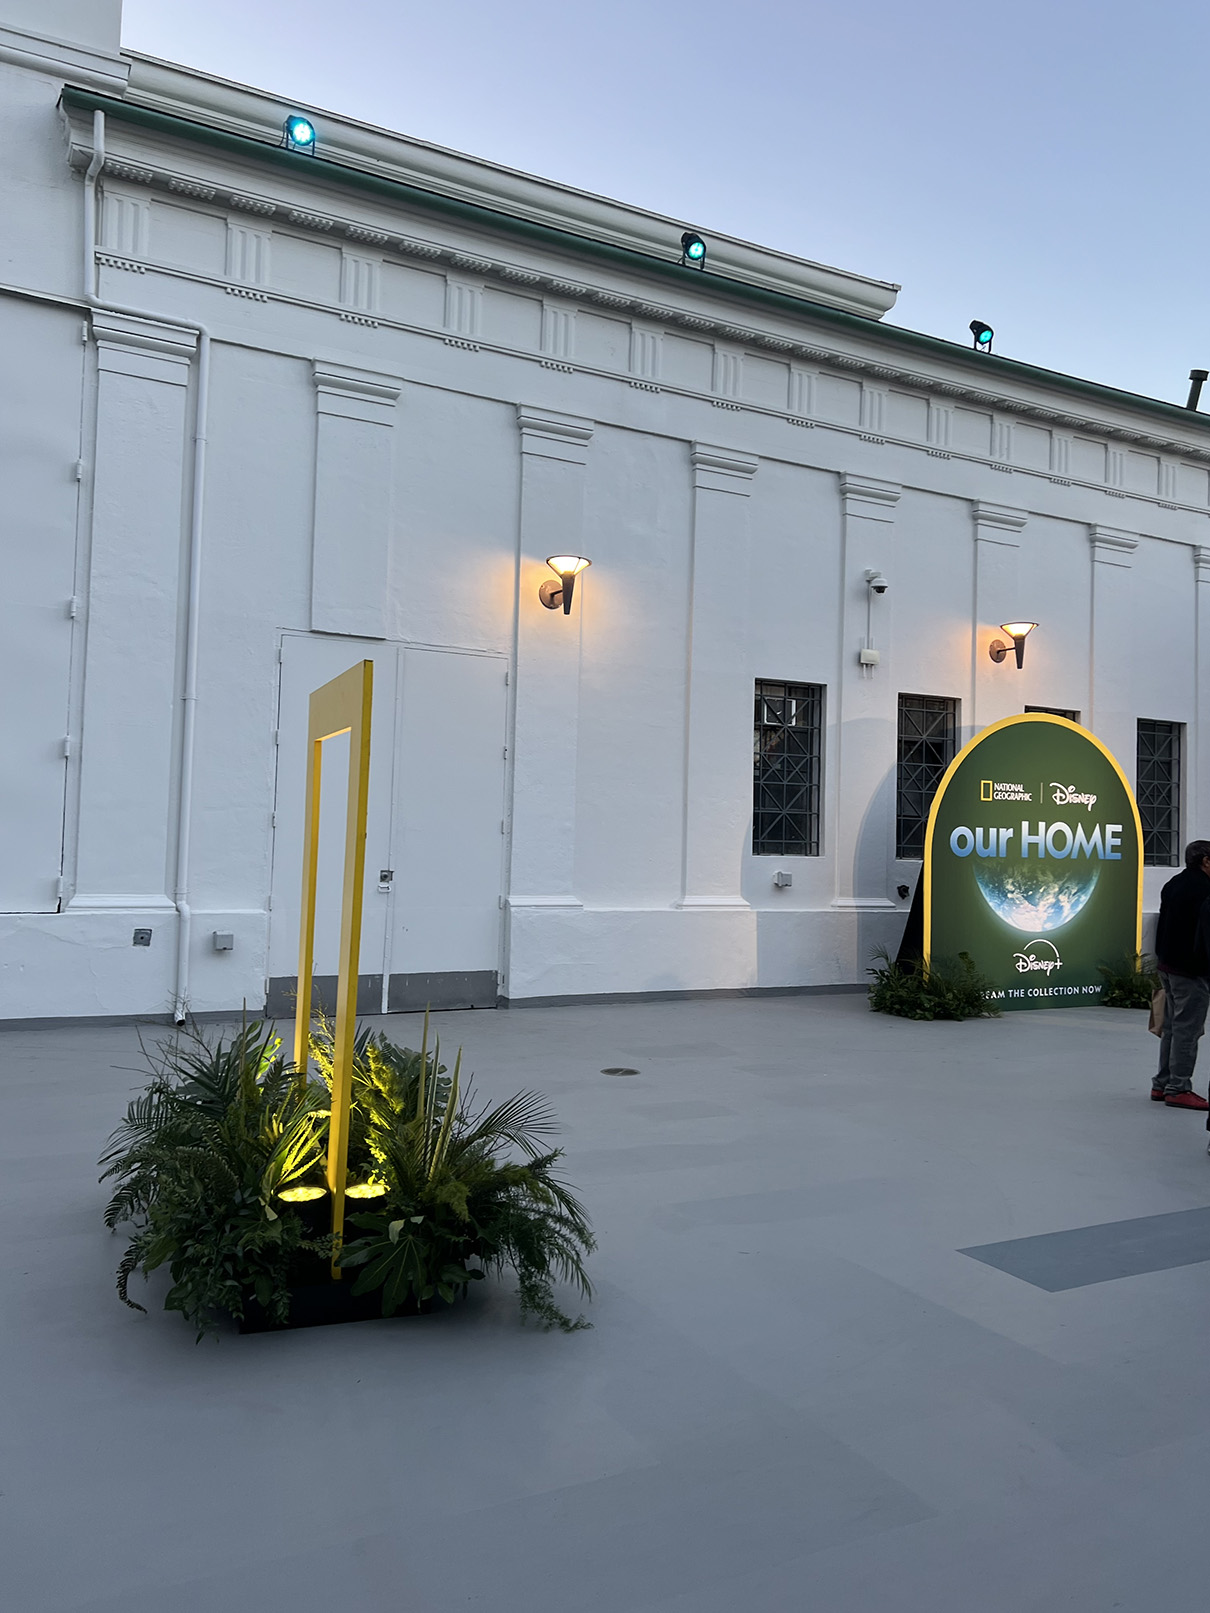 National Geographic Event in Los Angeles (Photo by Julie Nguyen)